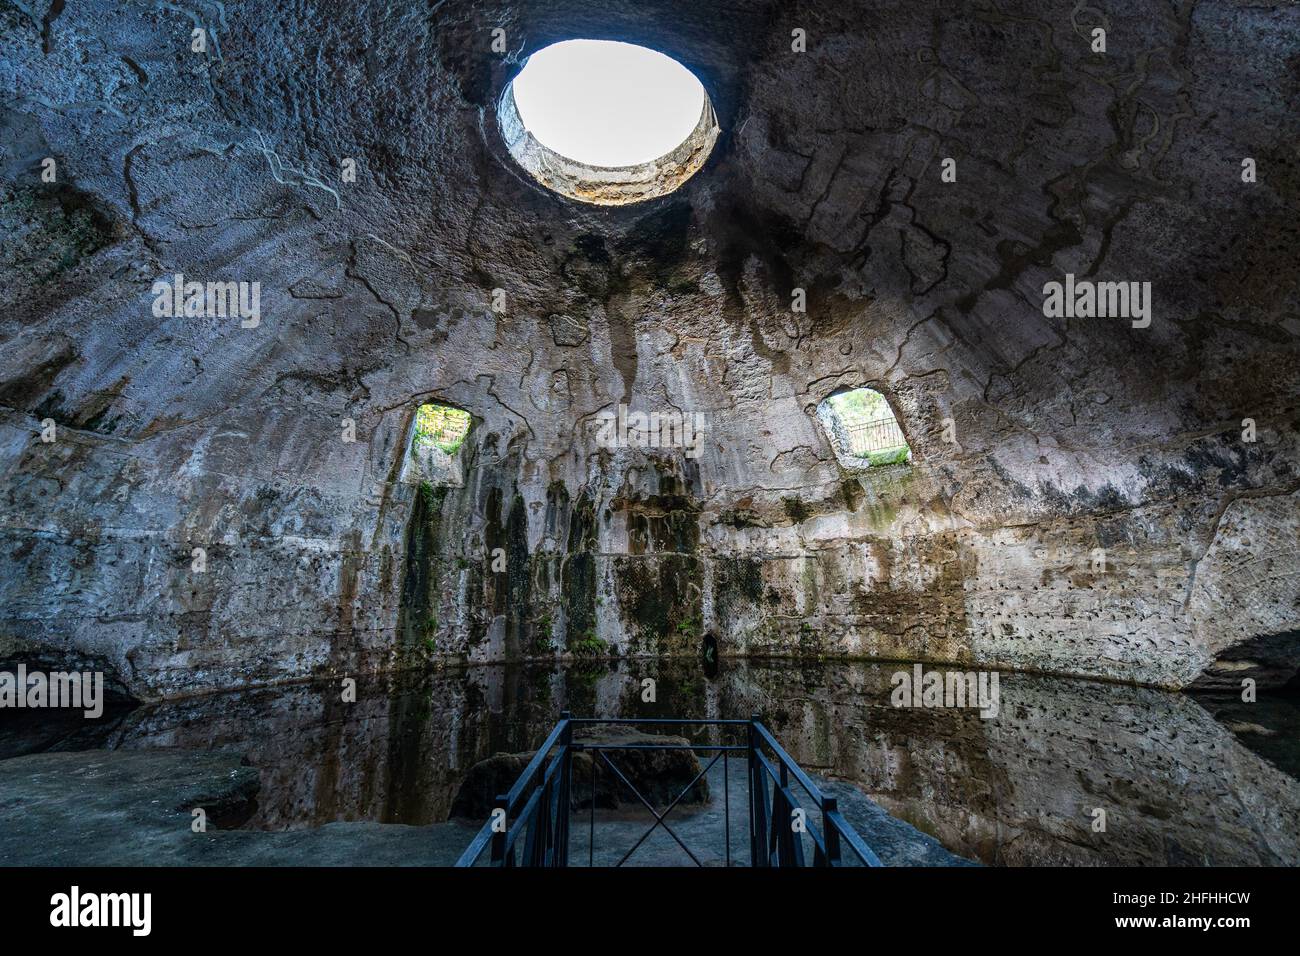 The big dome of the so called “Temple of Mercury” at Baiae archaeology park, which was a thermal bath during Roman period, Naples, Italy Stock Photo